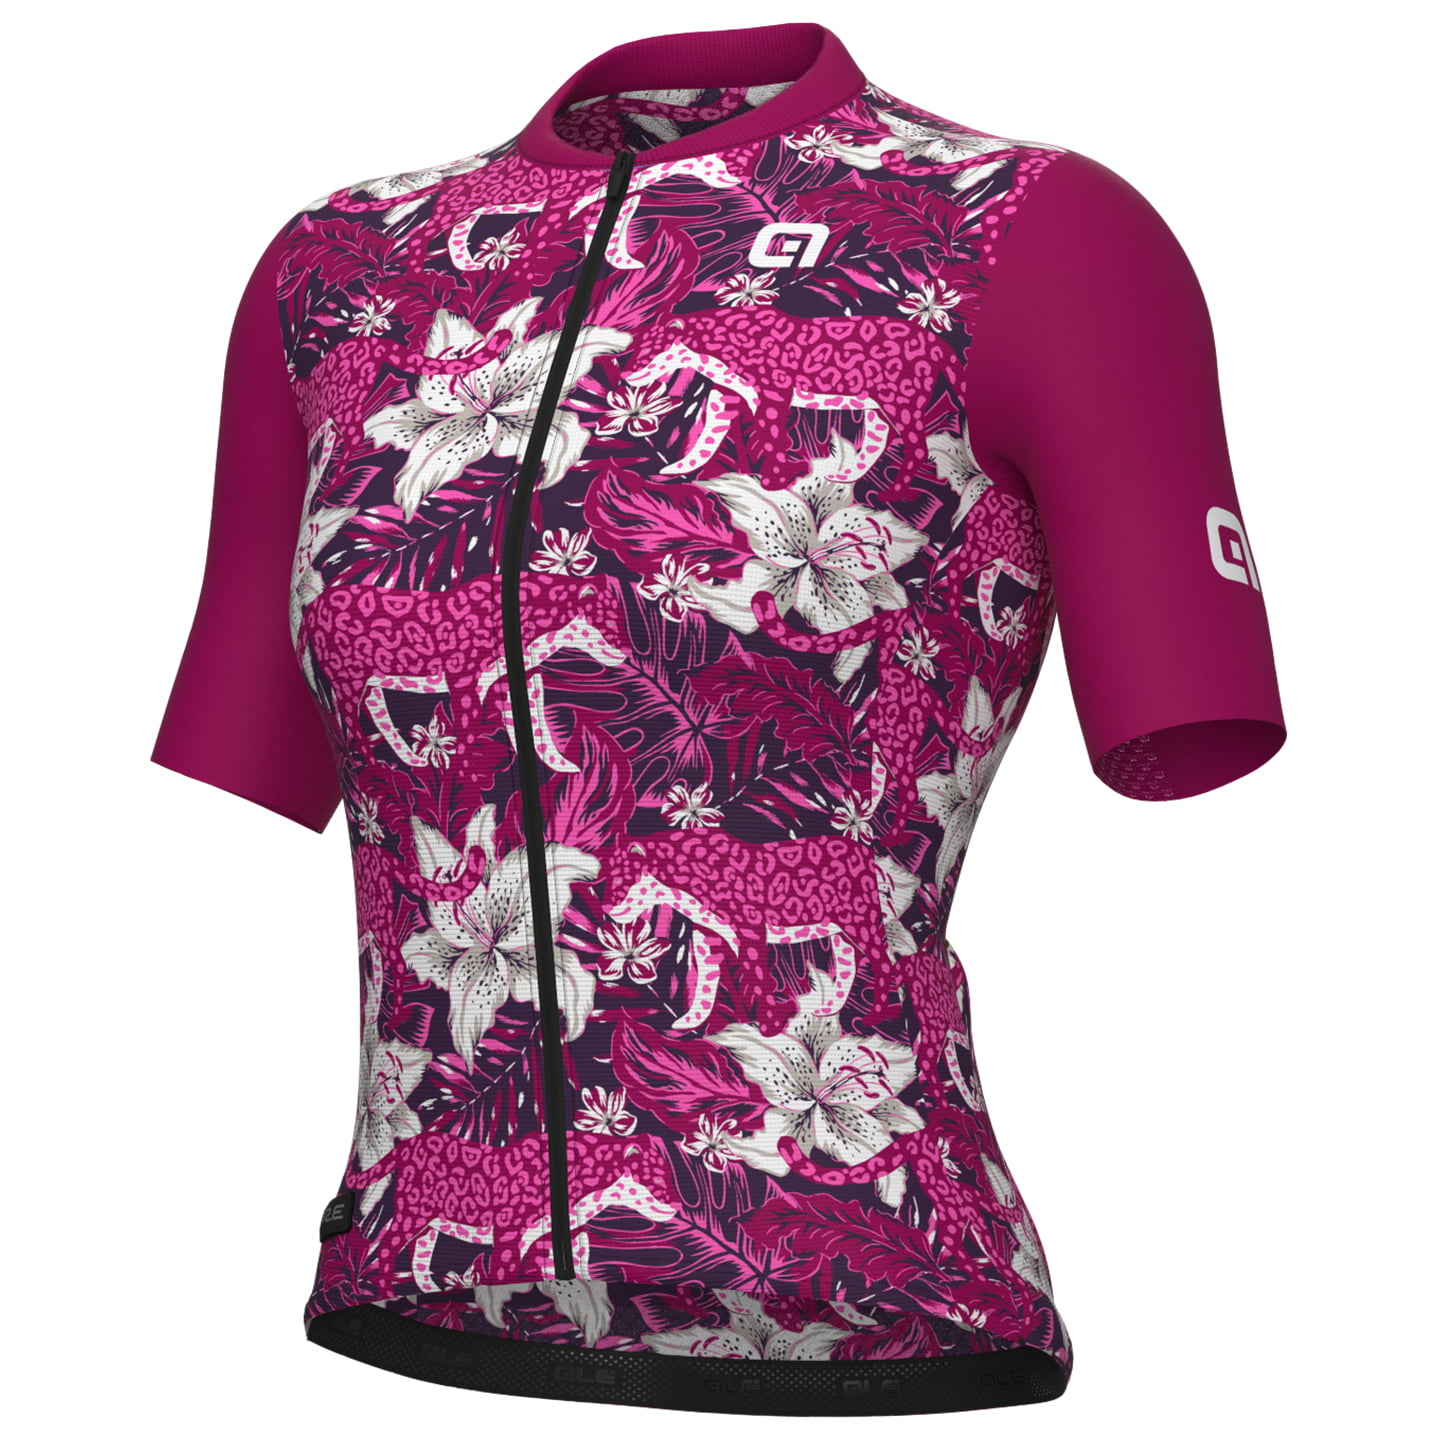 ALE Hibiscus Women’s Jersey Women’s Short Sleeve Jersey, size M, Cycling jersey, Cycle clothing